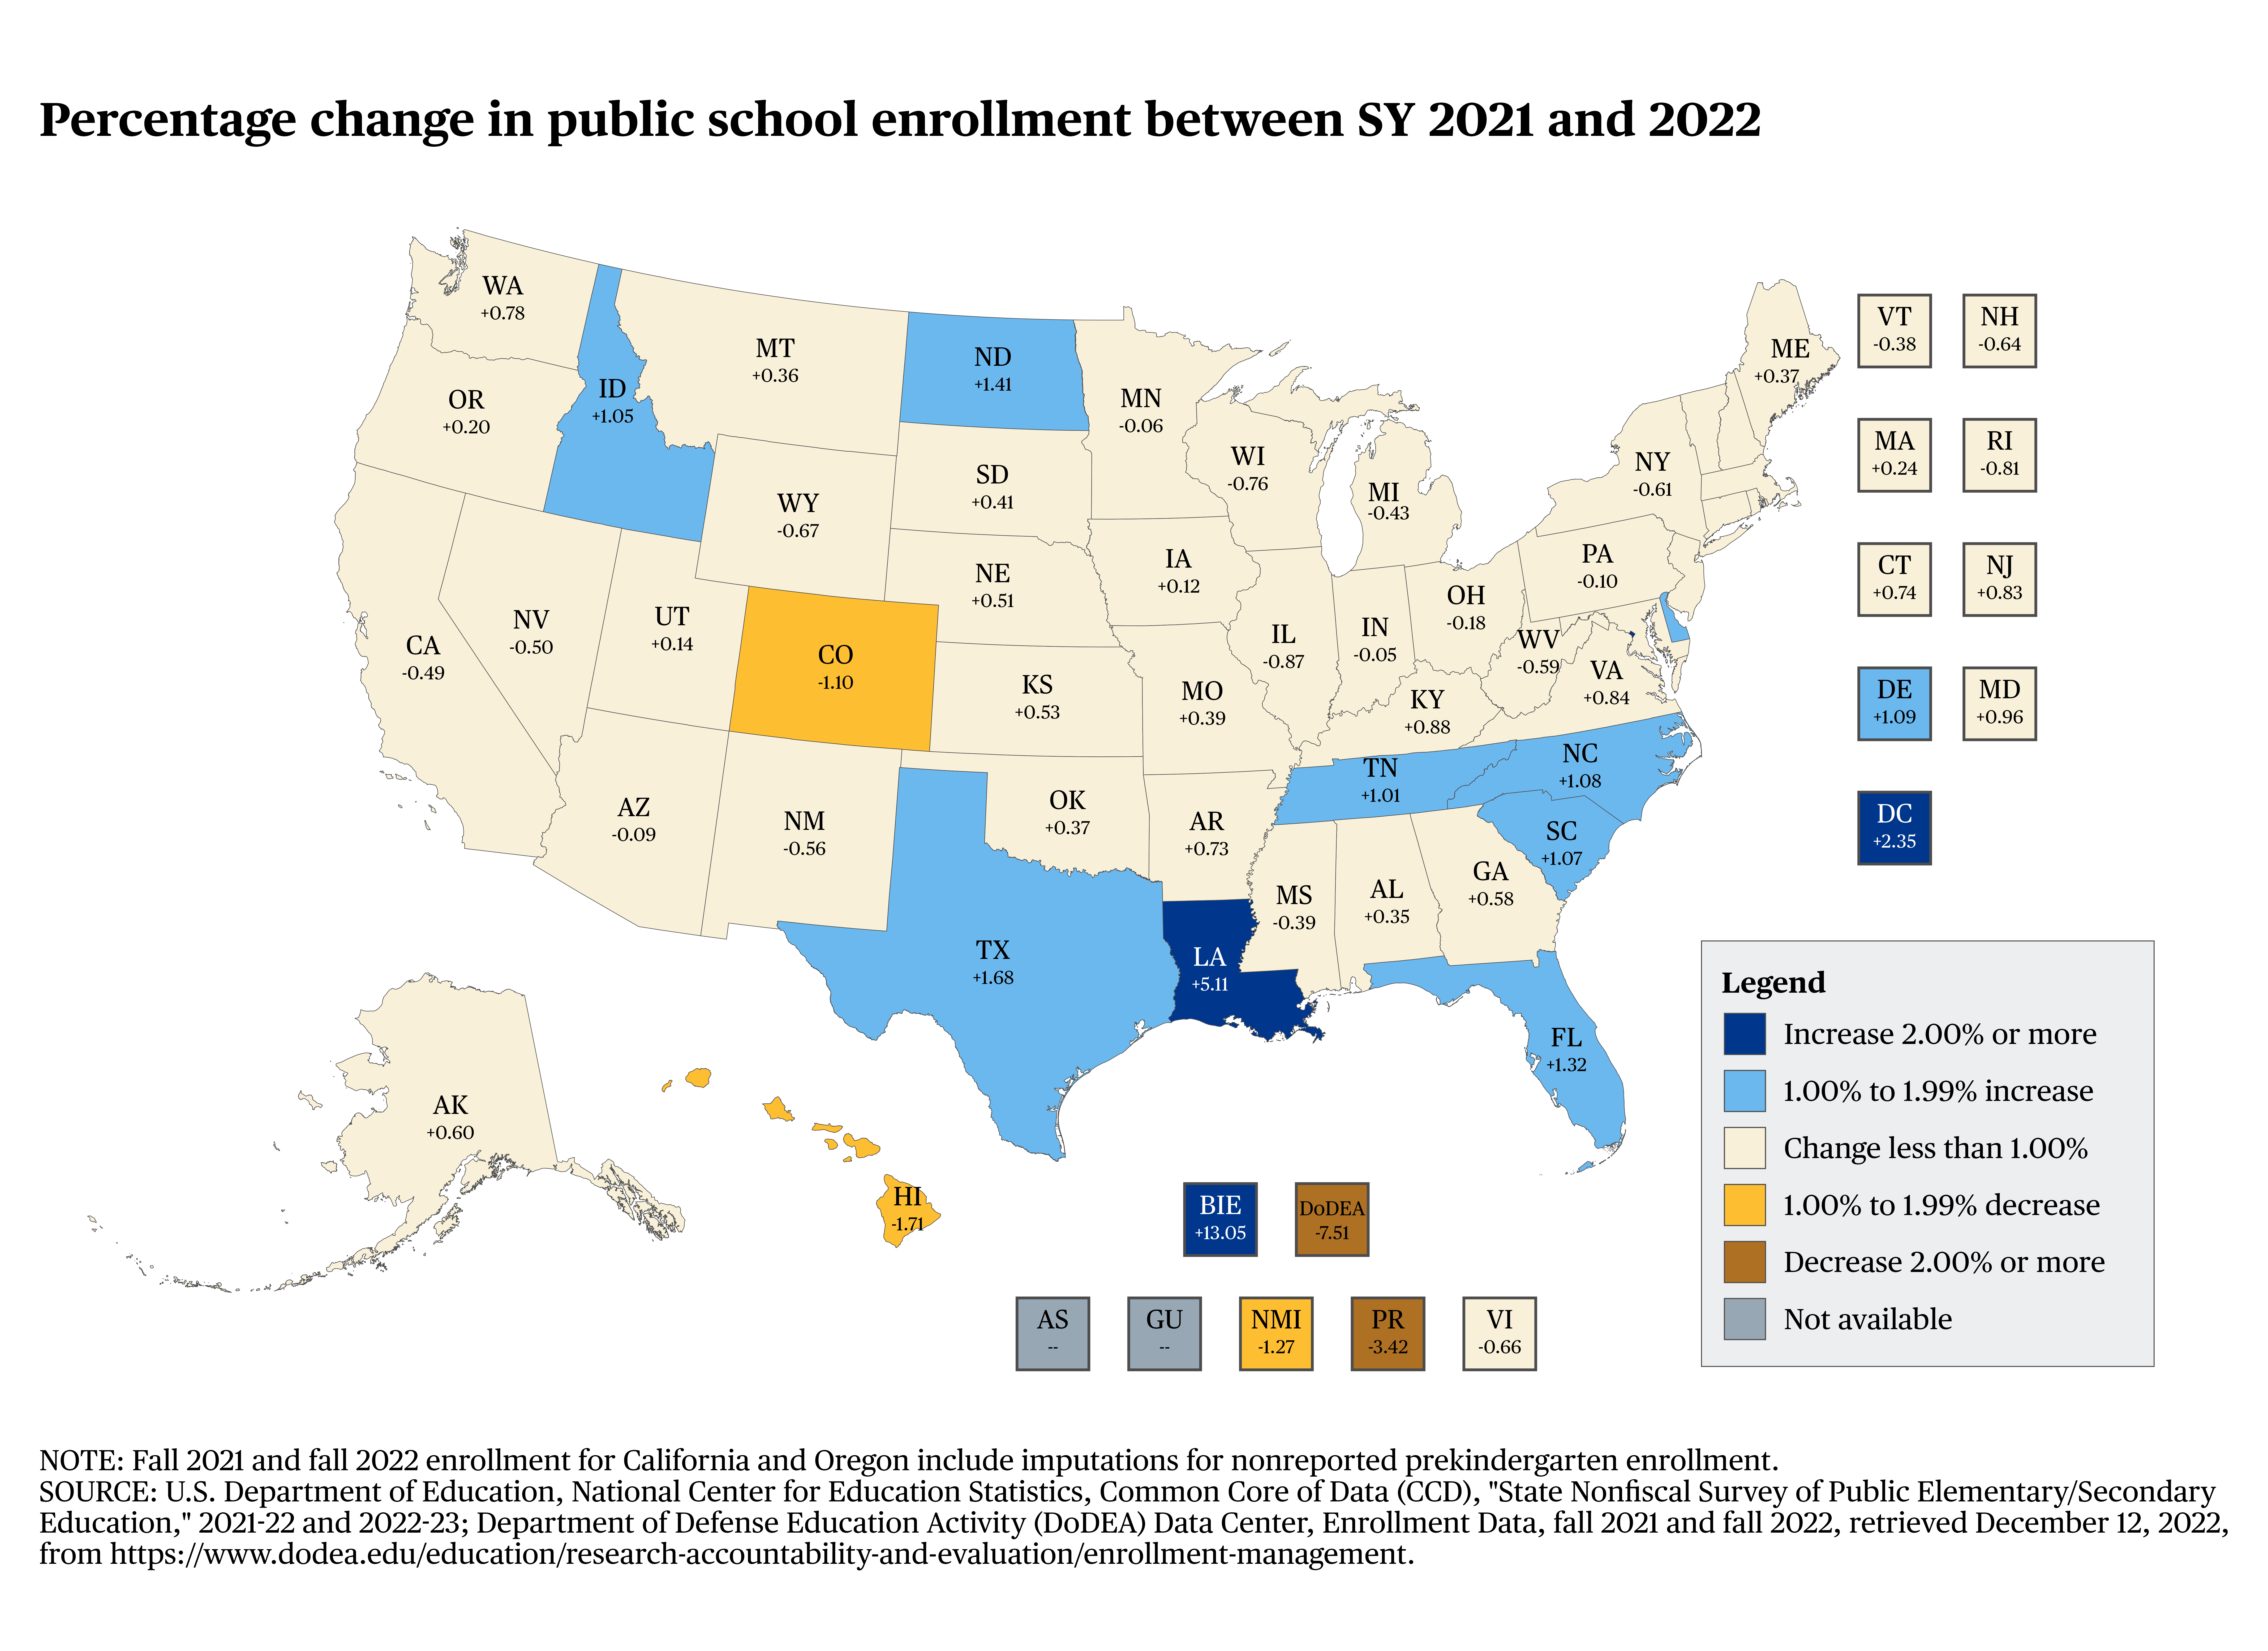  Percentage change in public school enrollment between SY 2021 and 2022